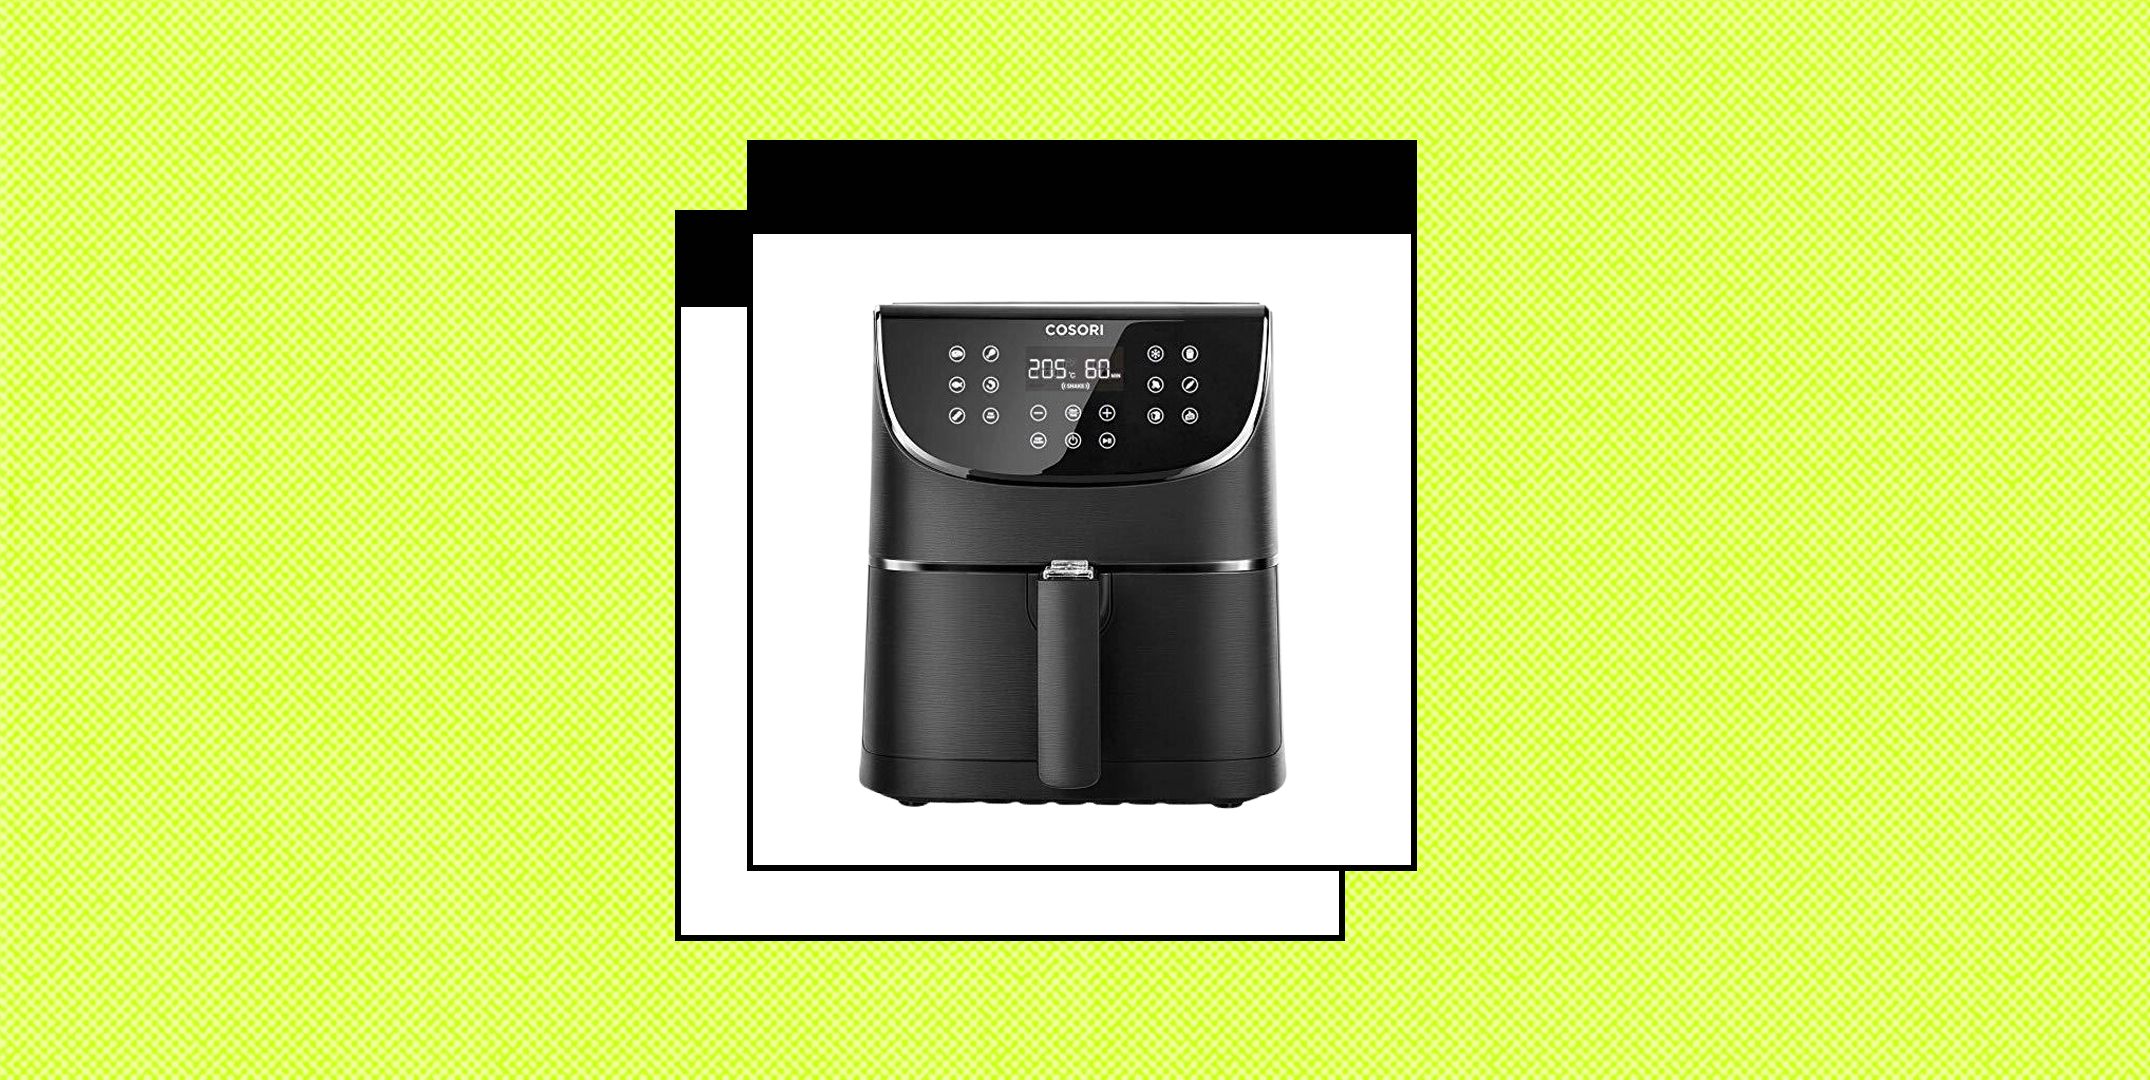 Our Fave Air Fryer Is Over 50% Off Ahead of the Prime Big Deal